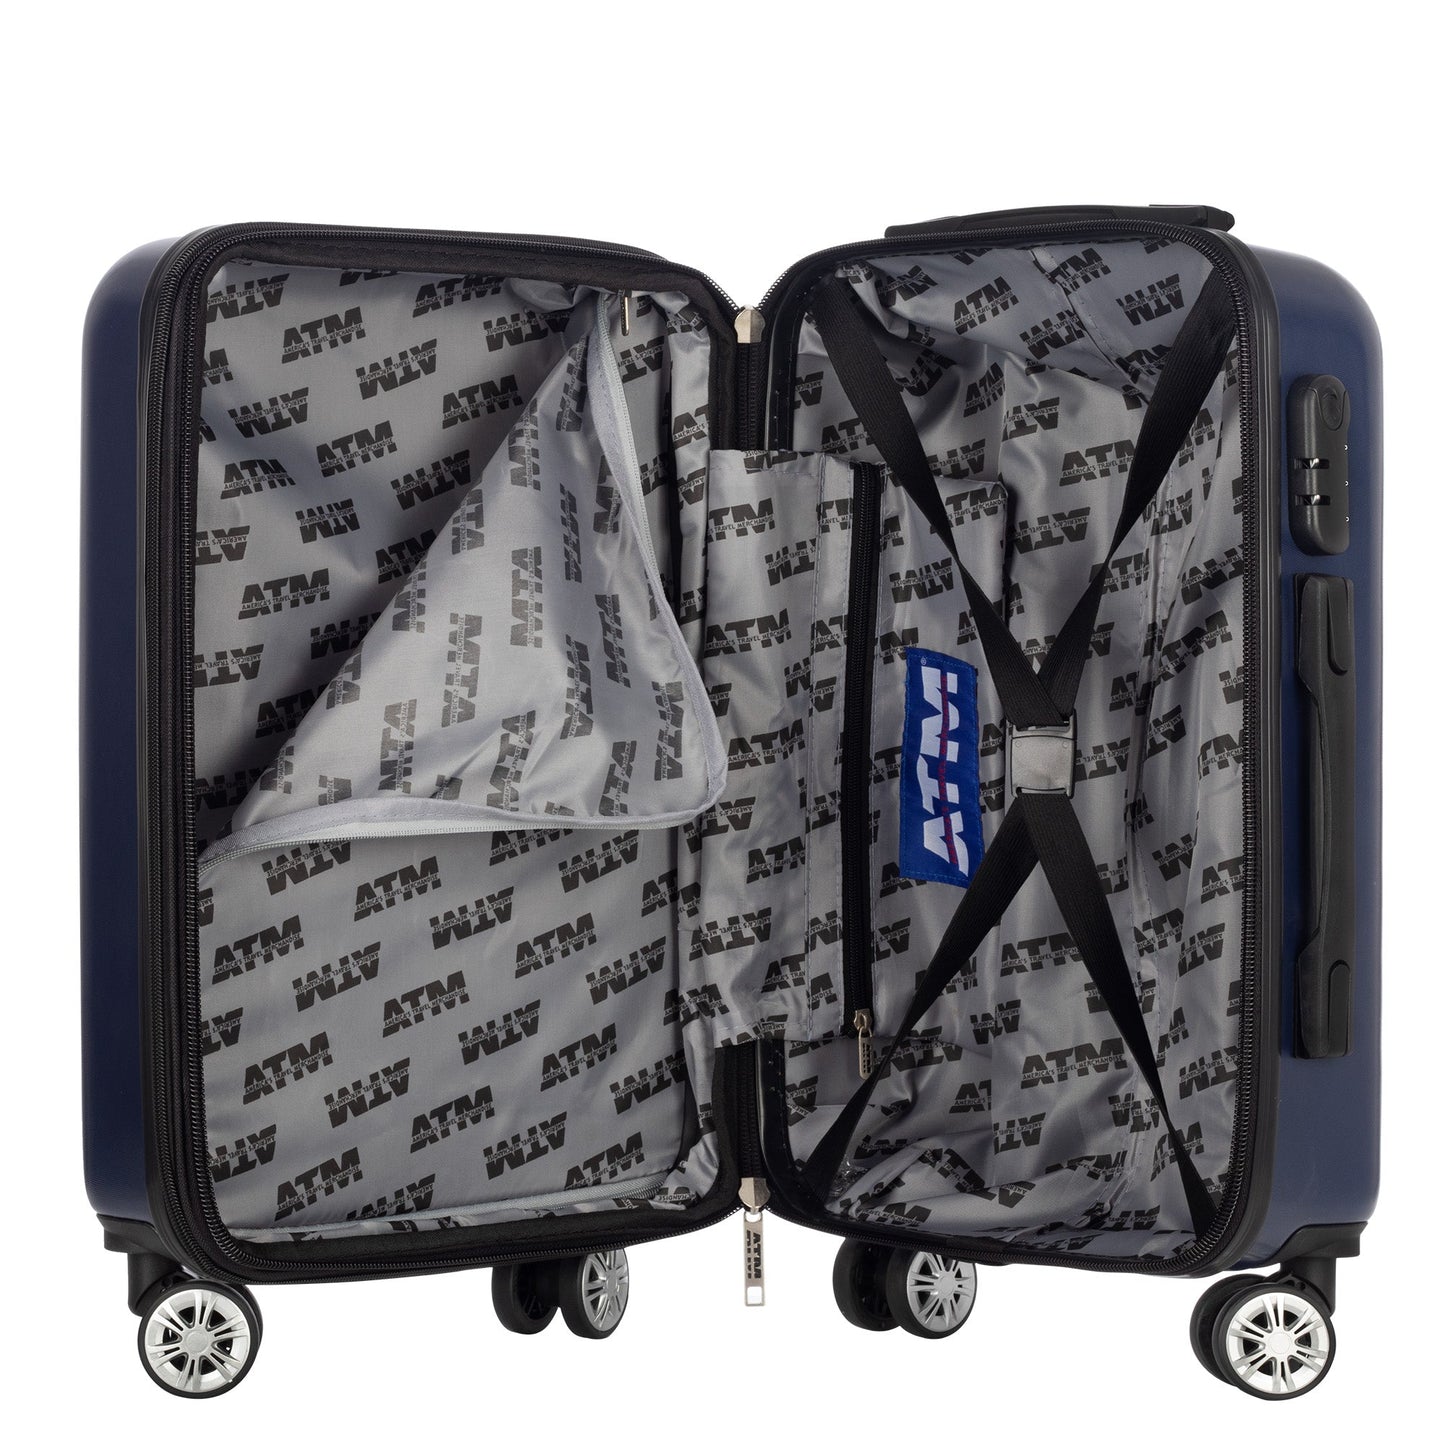 Soto collection luggage blue (20") Suitcase Lock Spinner